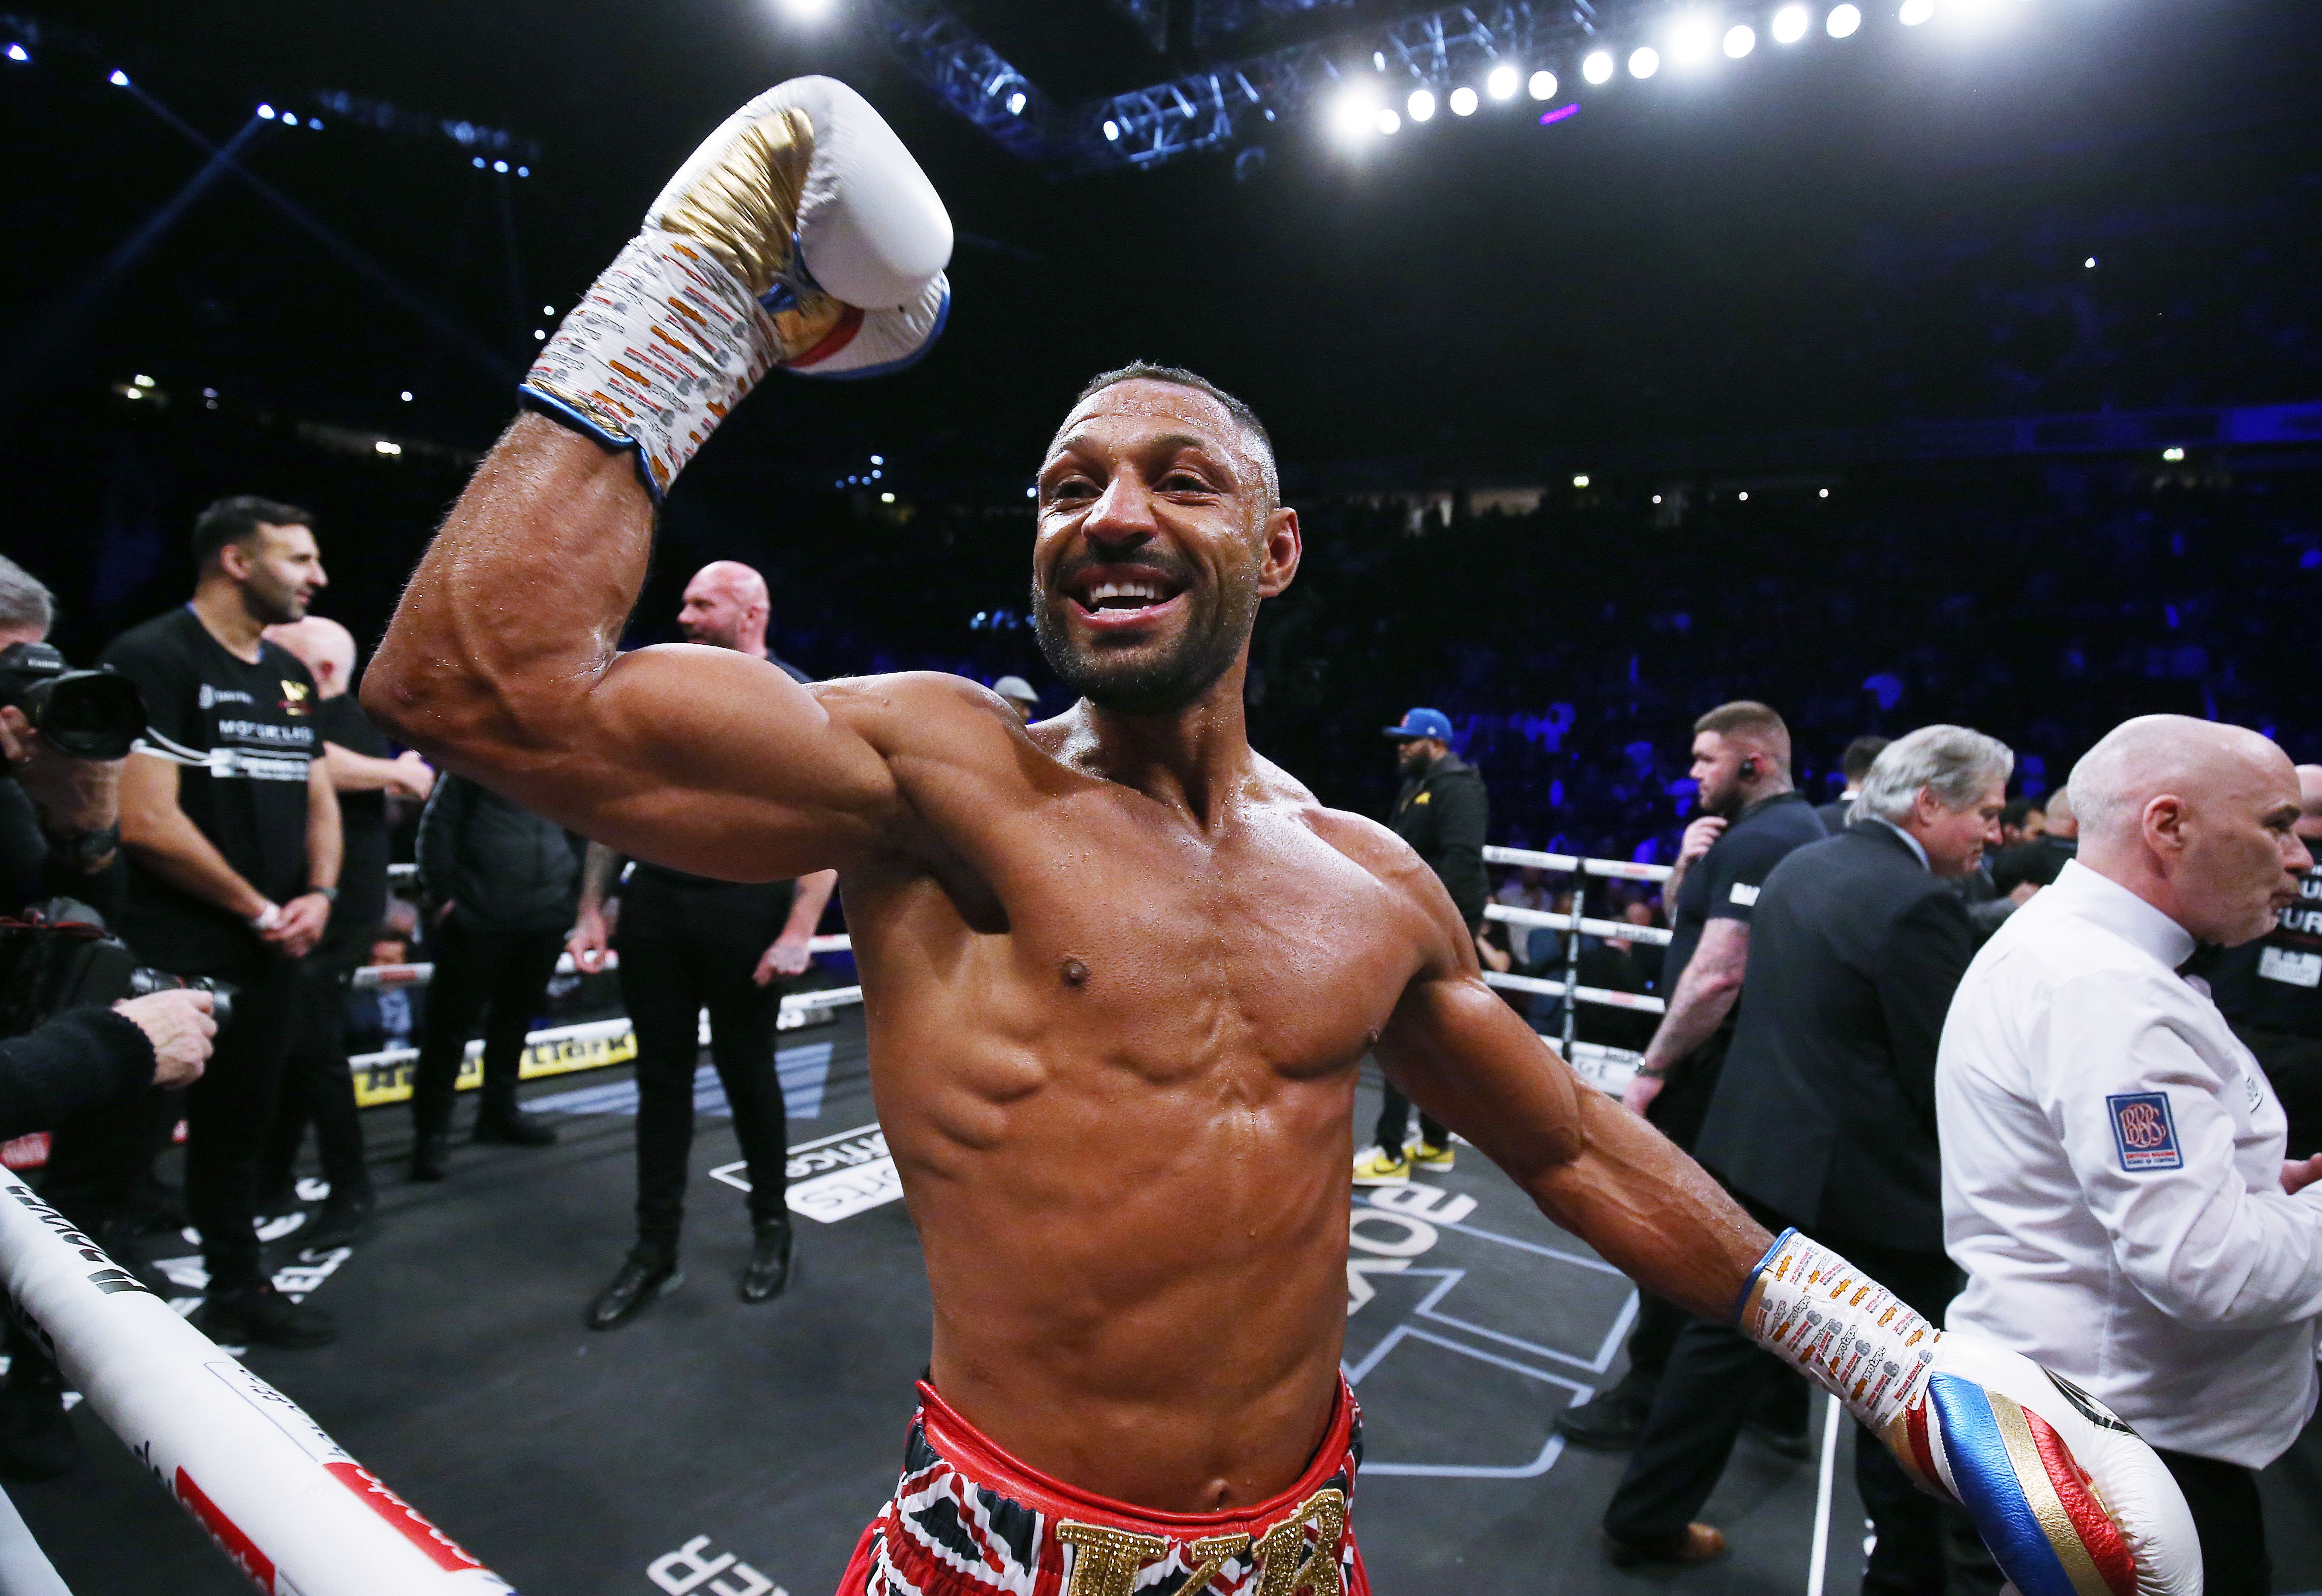 Kell Brook has been 'approached' by several promoters regarding a comeback fight according to reports